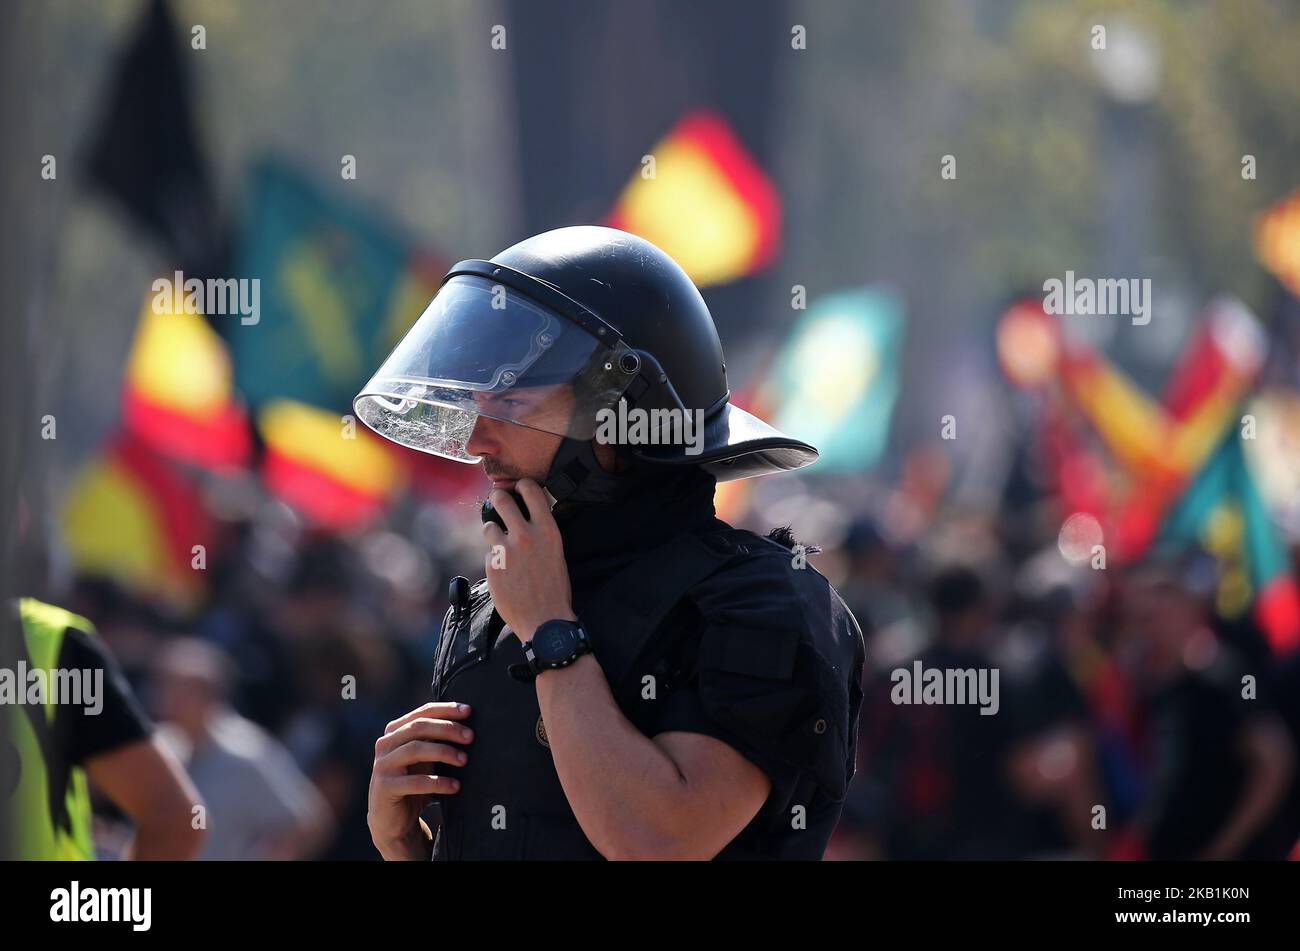 Spanish National Police and Civil Guard officers demonstrate during a demonstration called by JUSAPOL, a police Union, to commemorate their operation to prevent the 2017 Catalonia Independence Referendum on September 29, 2018 in Barcelona, Spain. Spanish National Police and Civil Guard police officers marched today in Barcelona to demand the same salary and conditions as Autonomous Police Officers and to commemorate the Operation Copernico which was held in Catalonia last October to prevent the Independence referendum called on October 1. (Photo by Urbanandsport/NurPhoto) Stock Photo